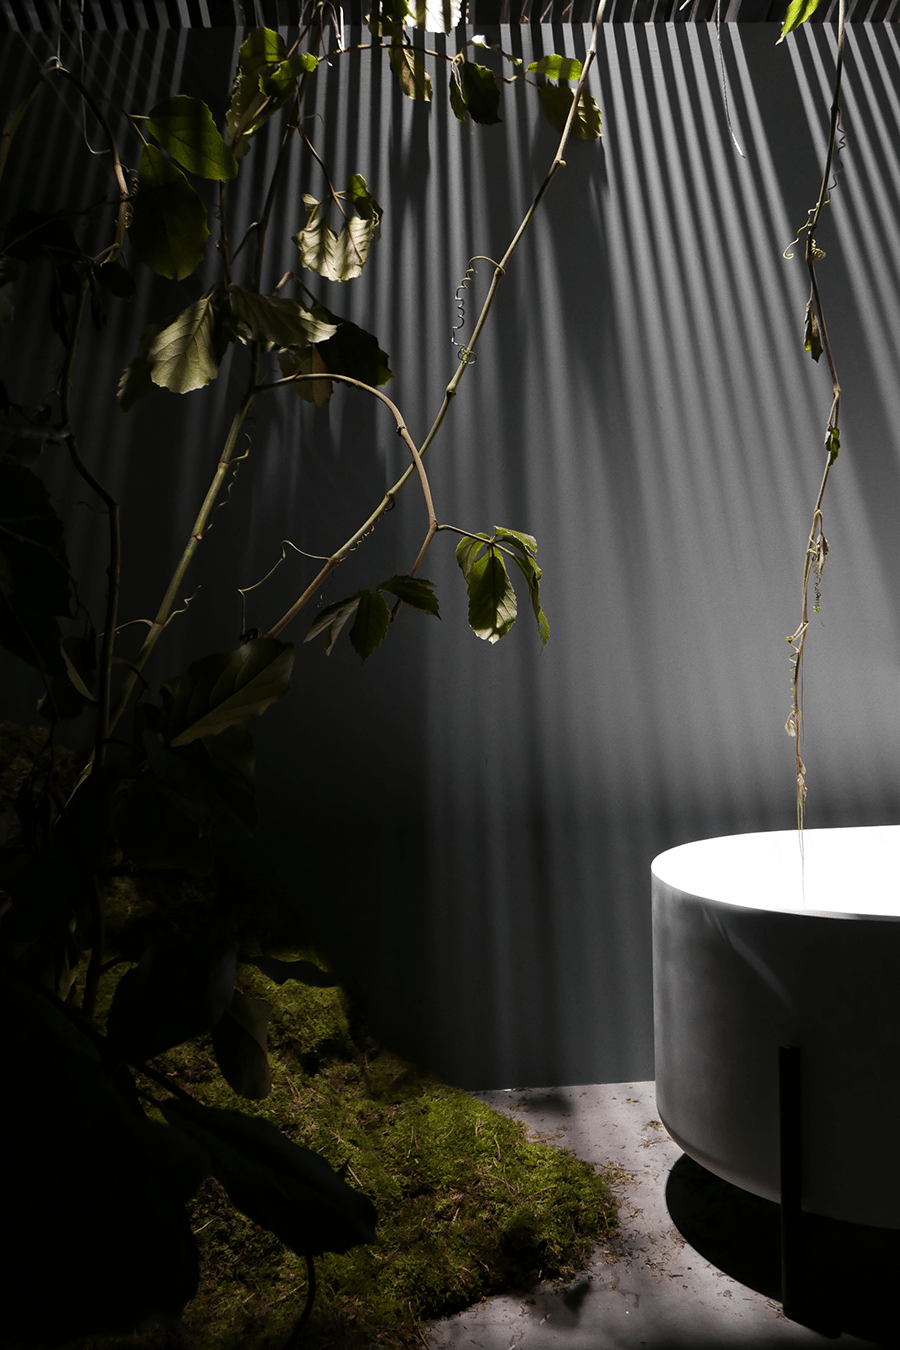 TRENDS 2018 FROM OSLO DESIGN FAIR